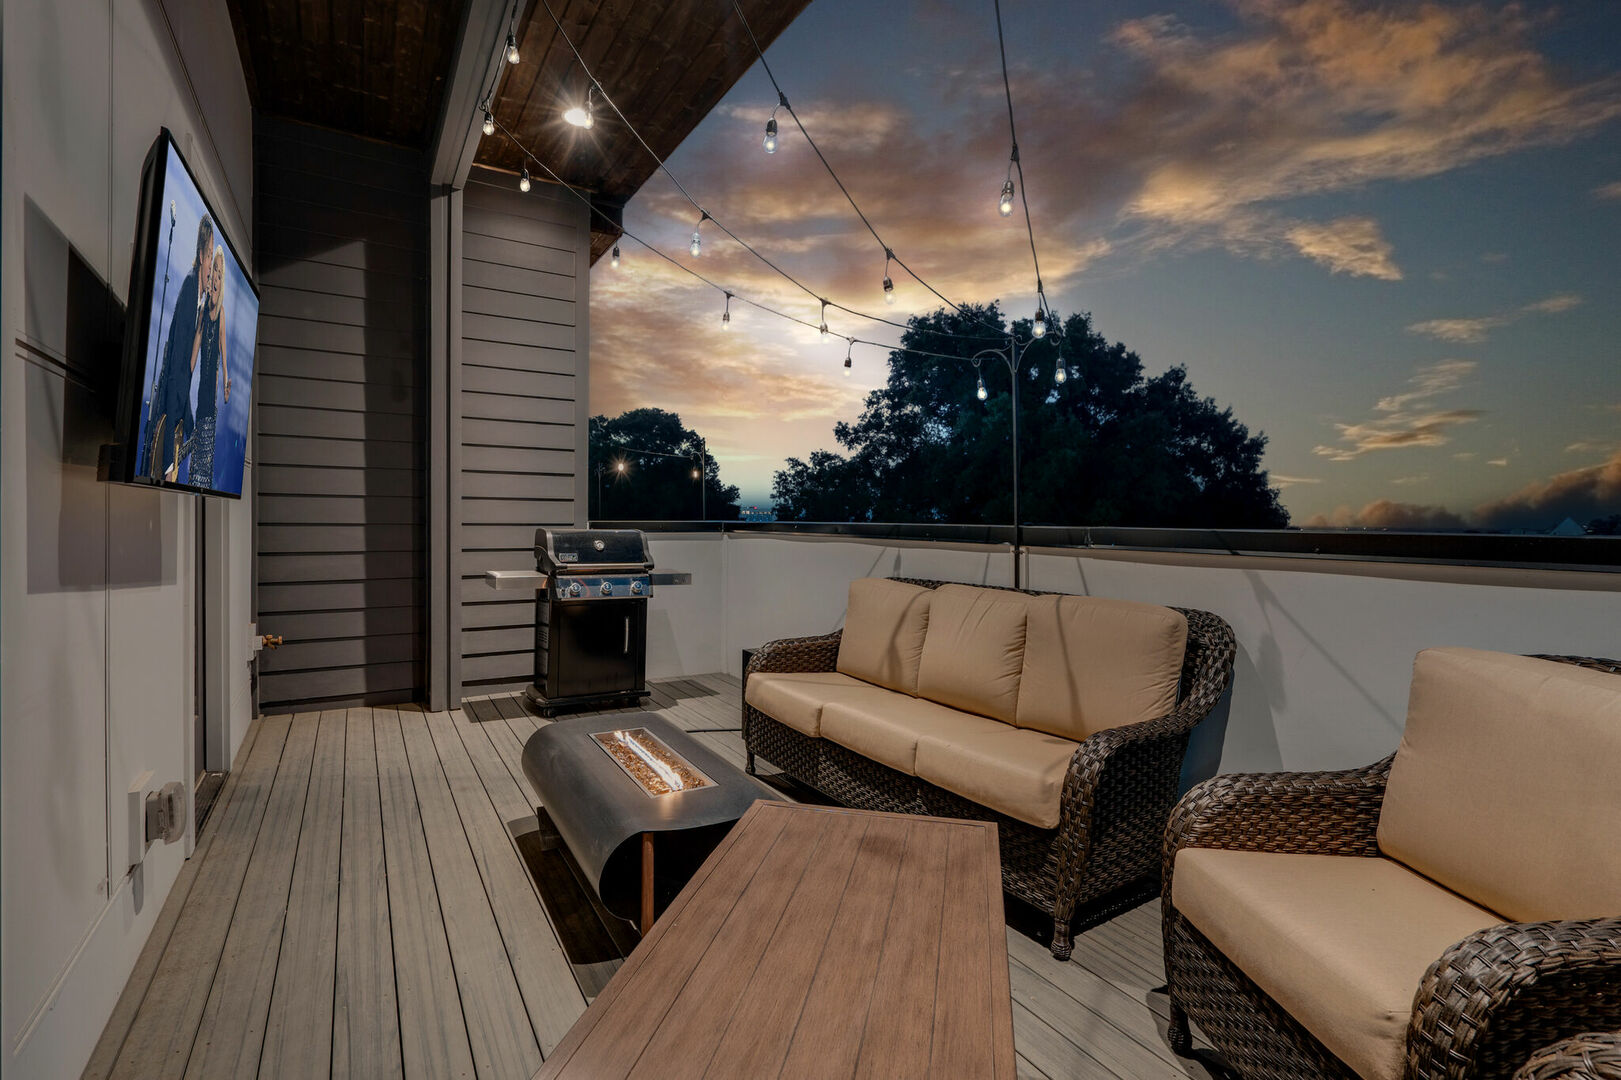 3rd unit: Rooftop balcony with fire pit, smart TV, outdoor BBQ, and lounge area. All draped in bistro lights.